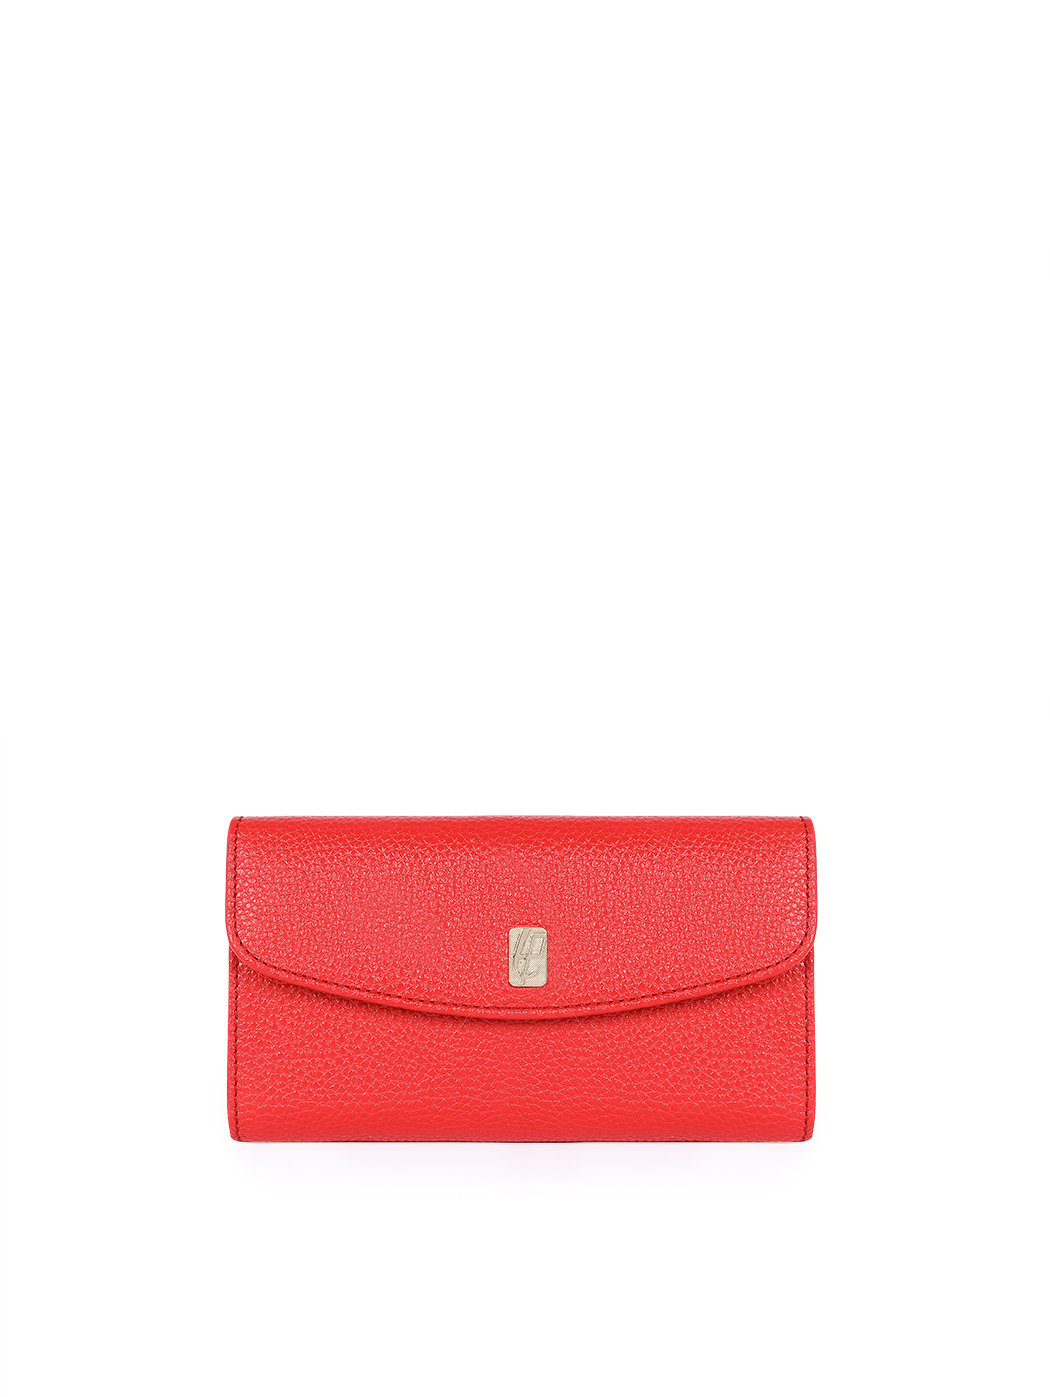 Long red leather wallet